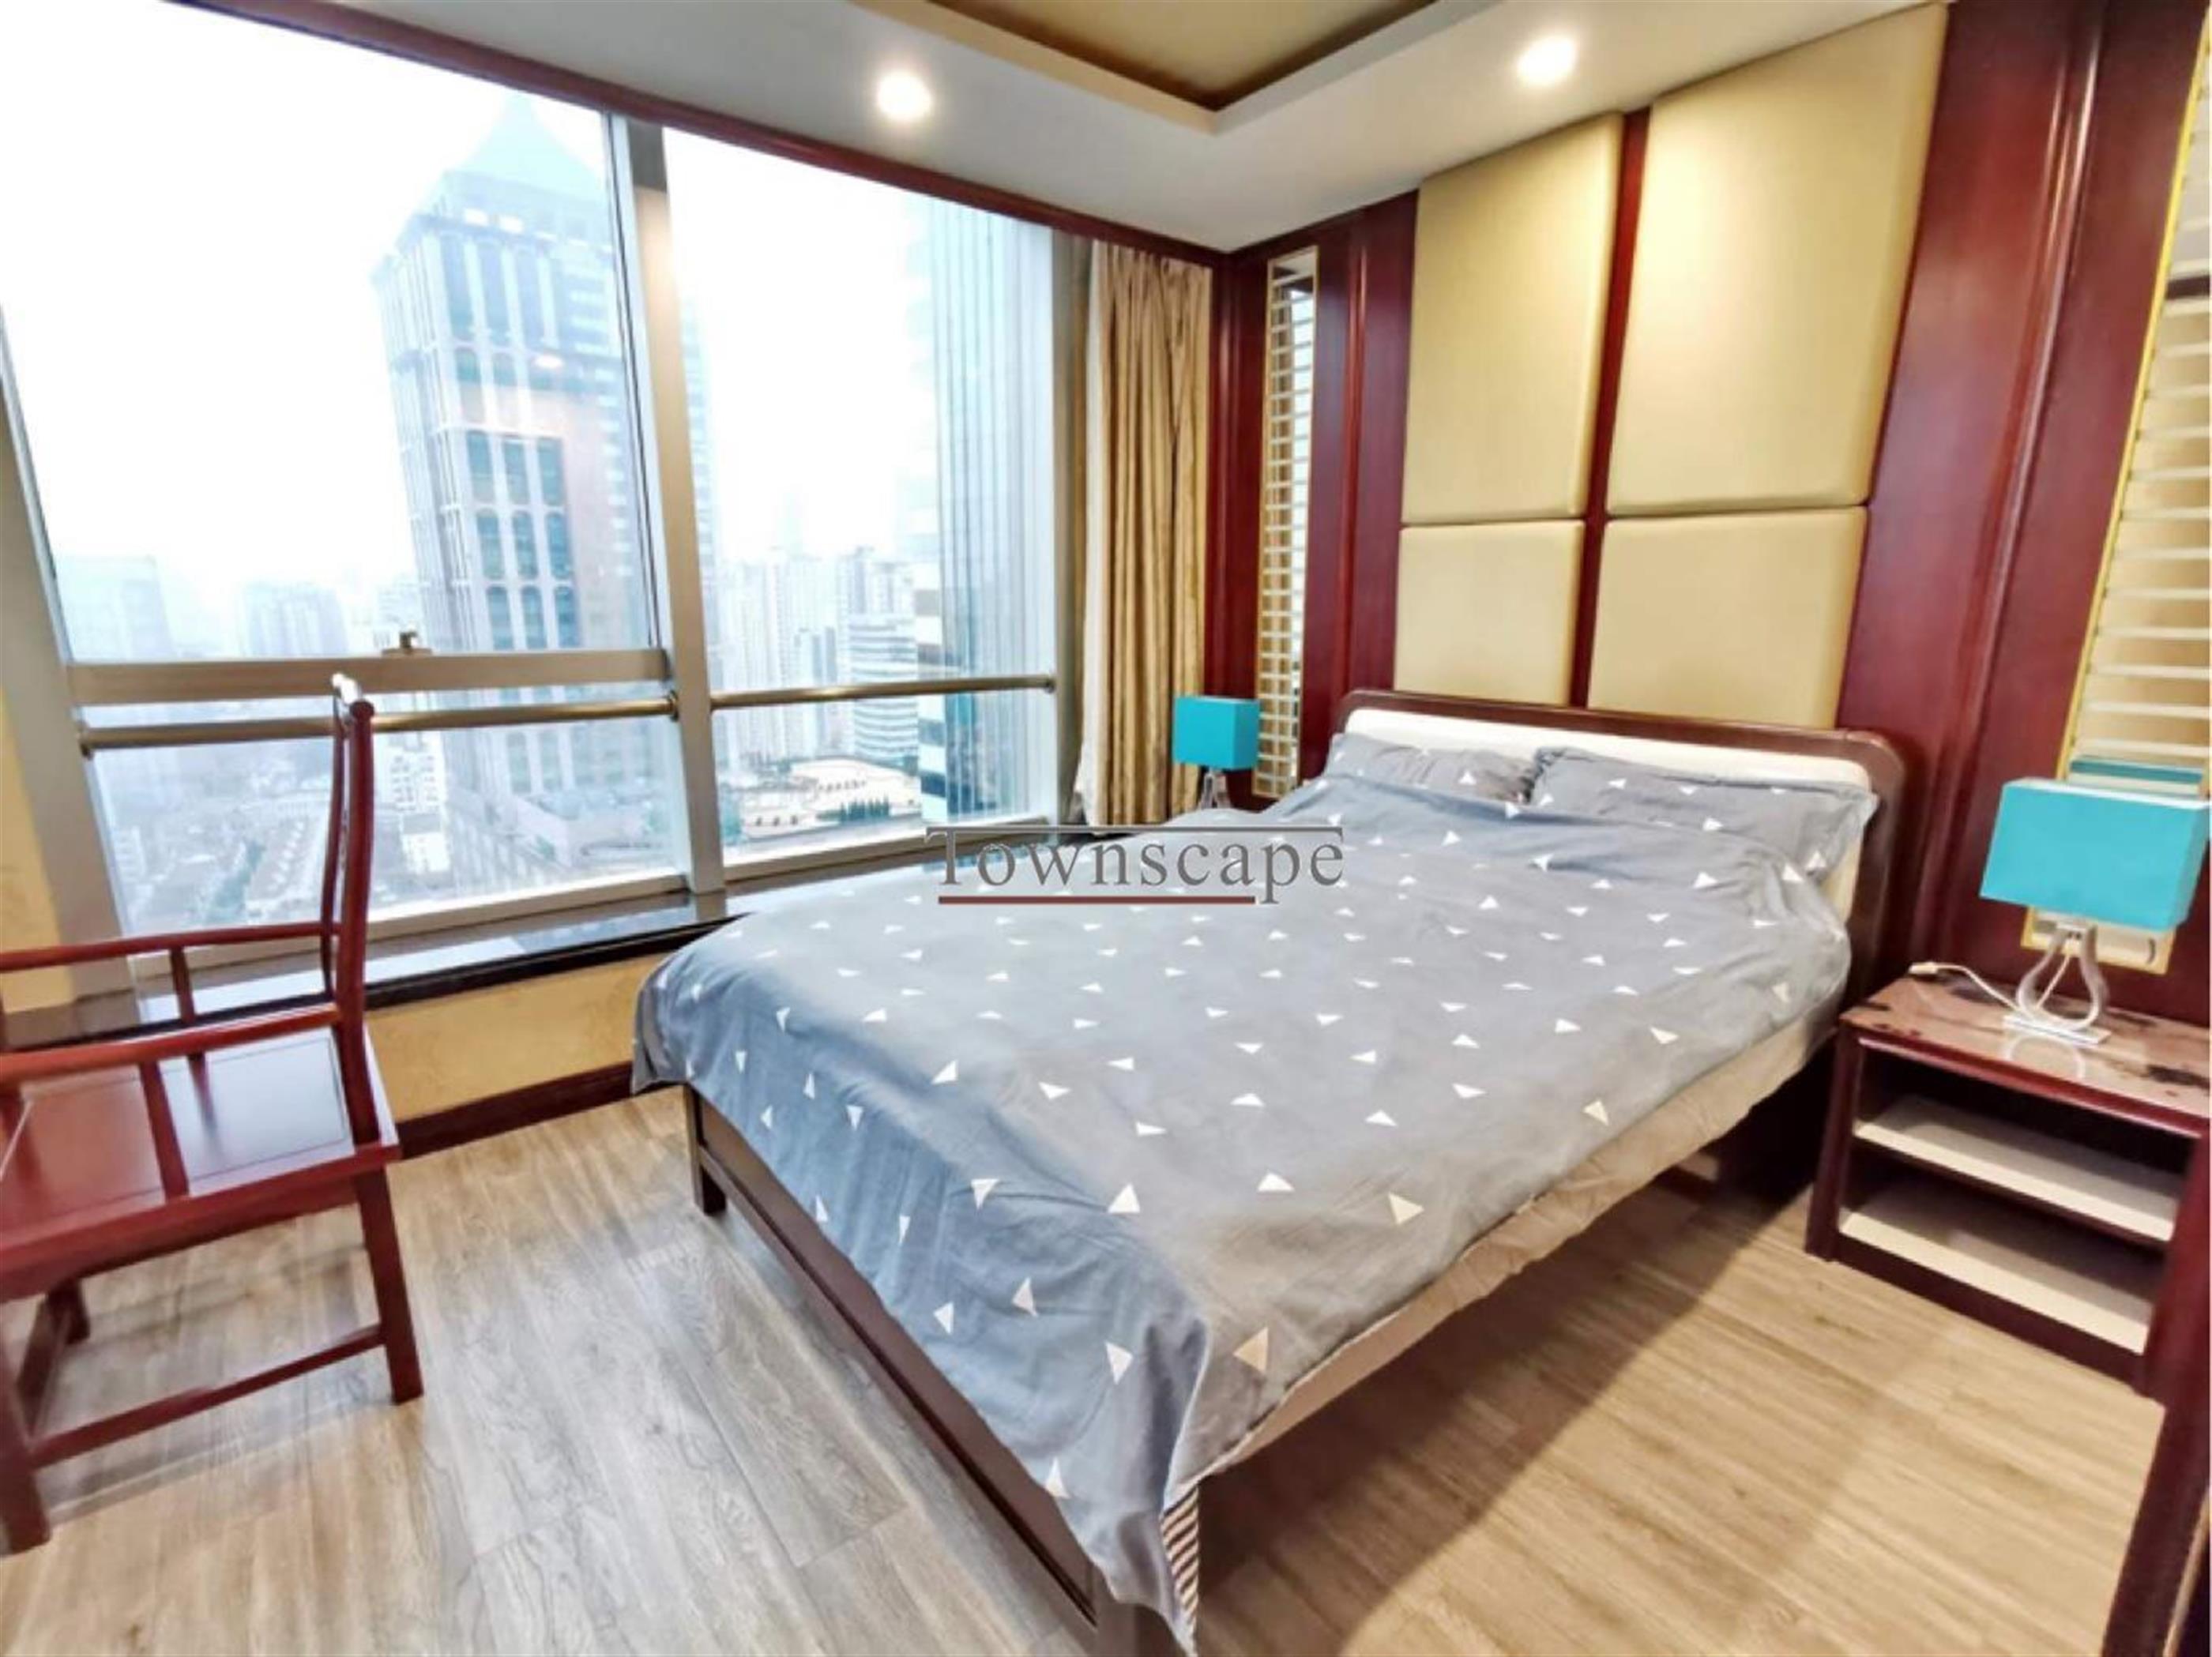 large bedroom windows Comfortable Cozy West Nanjing Road 1BR Apartment nr LN 2/12/13 for Rent in Shanghai